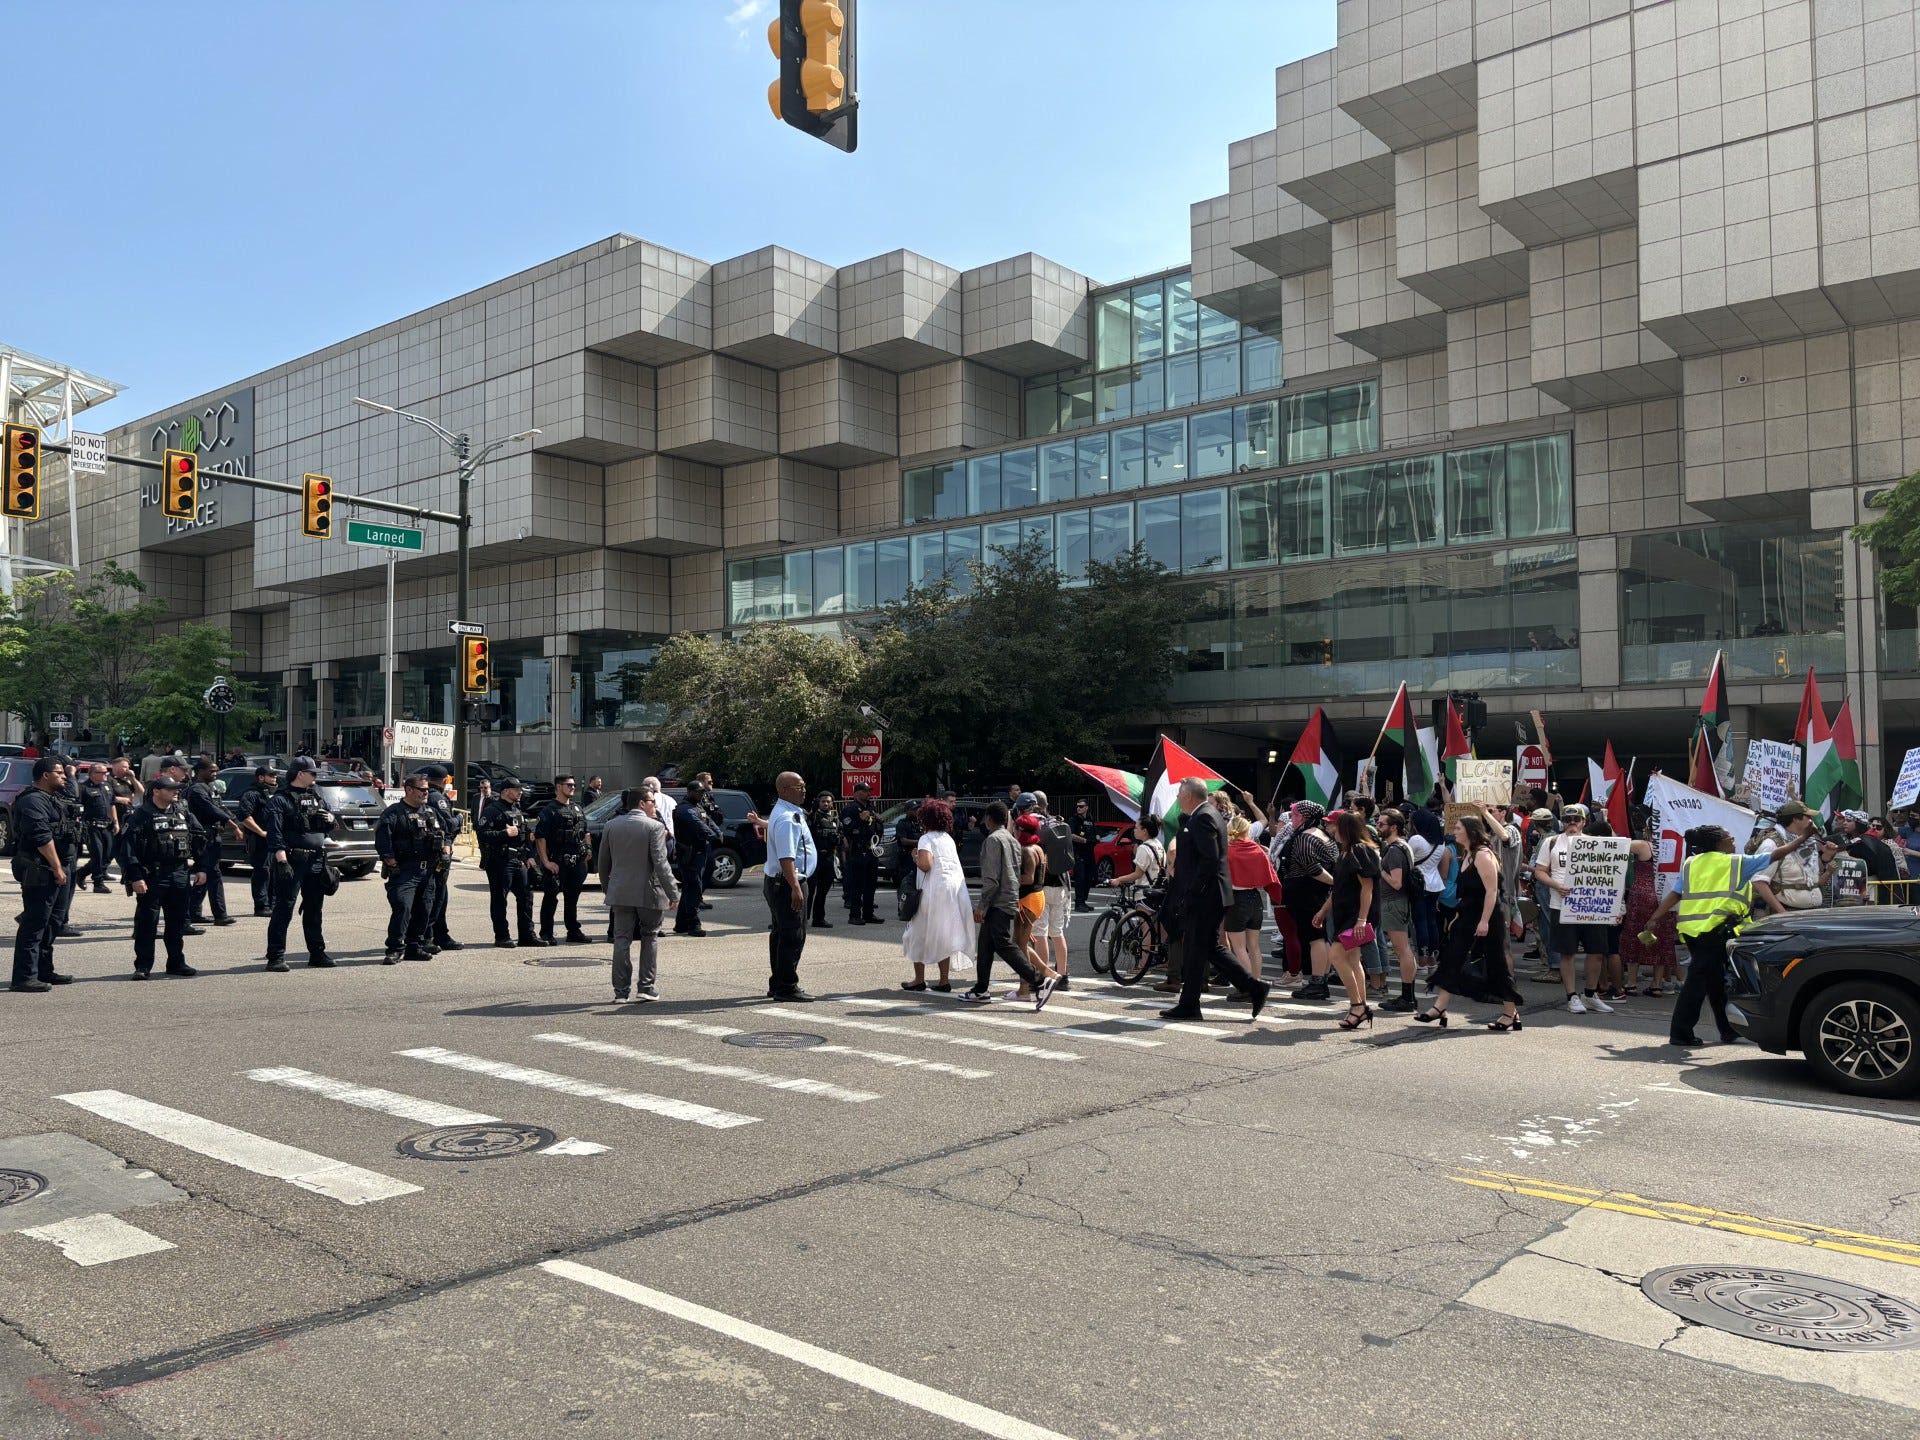 Biden's Detroit visit greeted by pro-Palestinian protesters